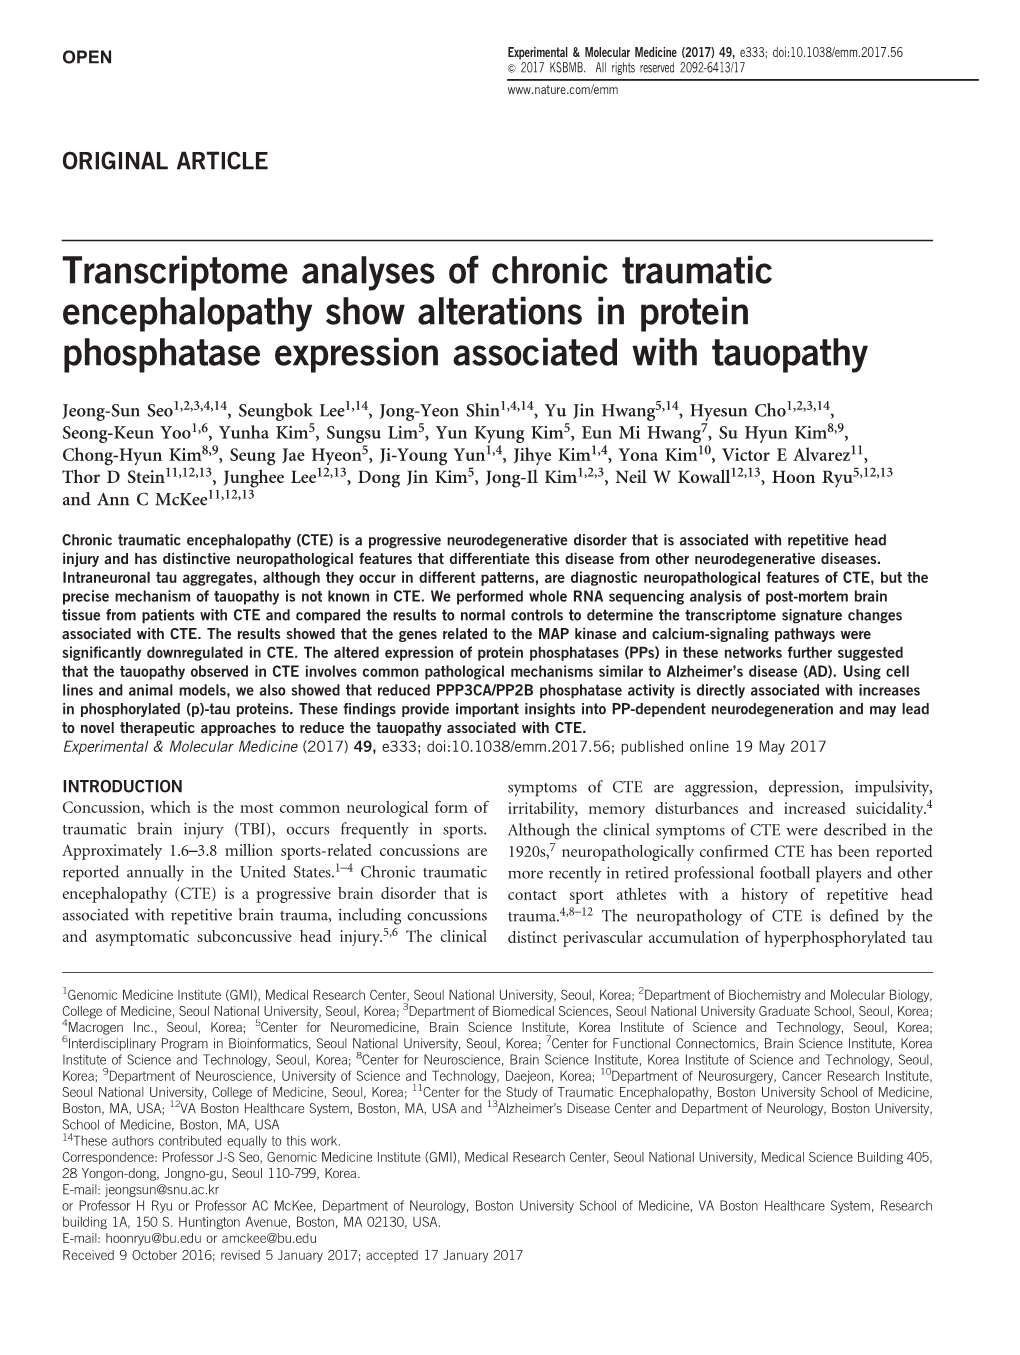 Transcriptome Analyses of Chronic Traumatic Encephalopathy Show Alterations in Protein Phosphatase Expression Associated with Tauopathy